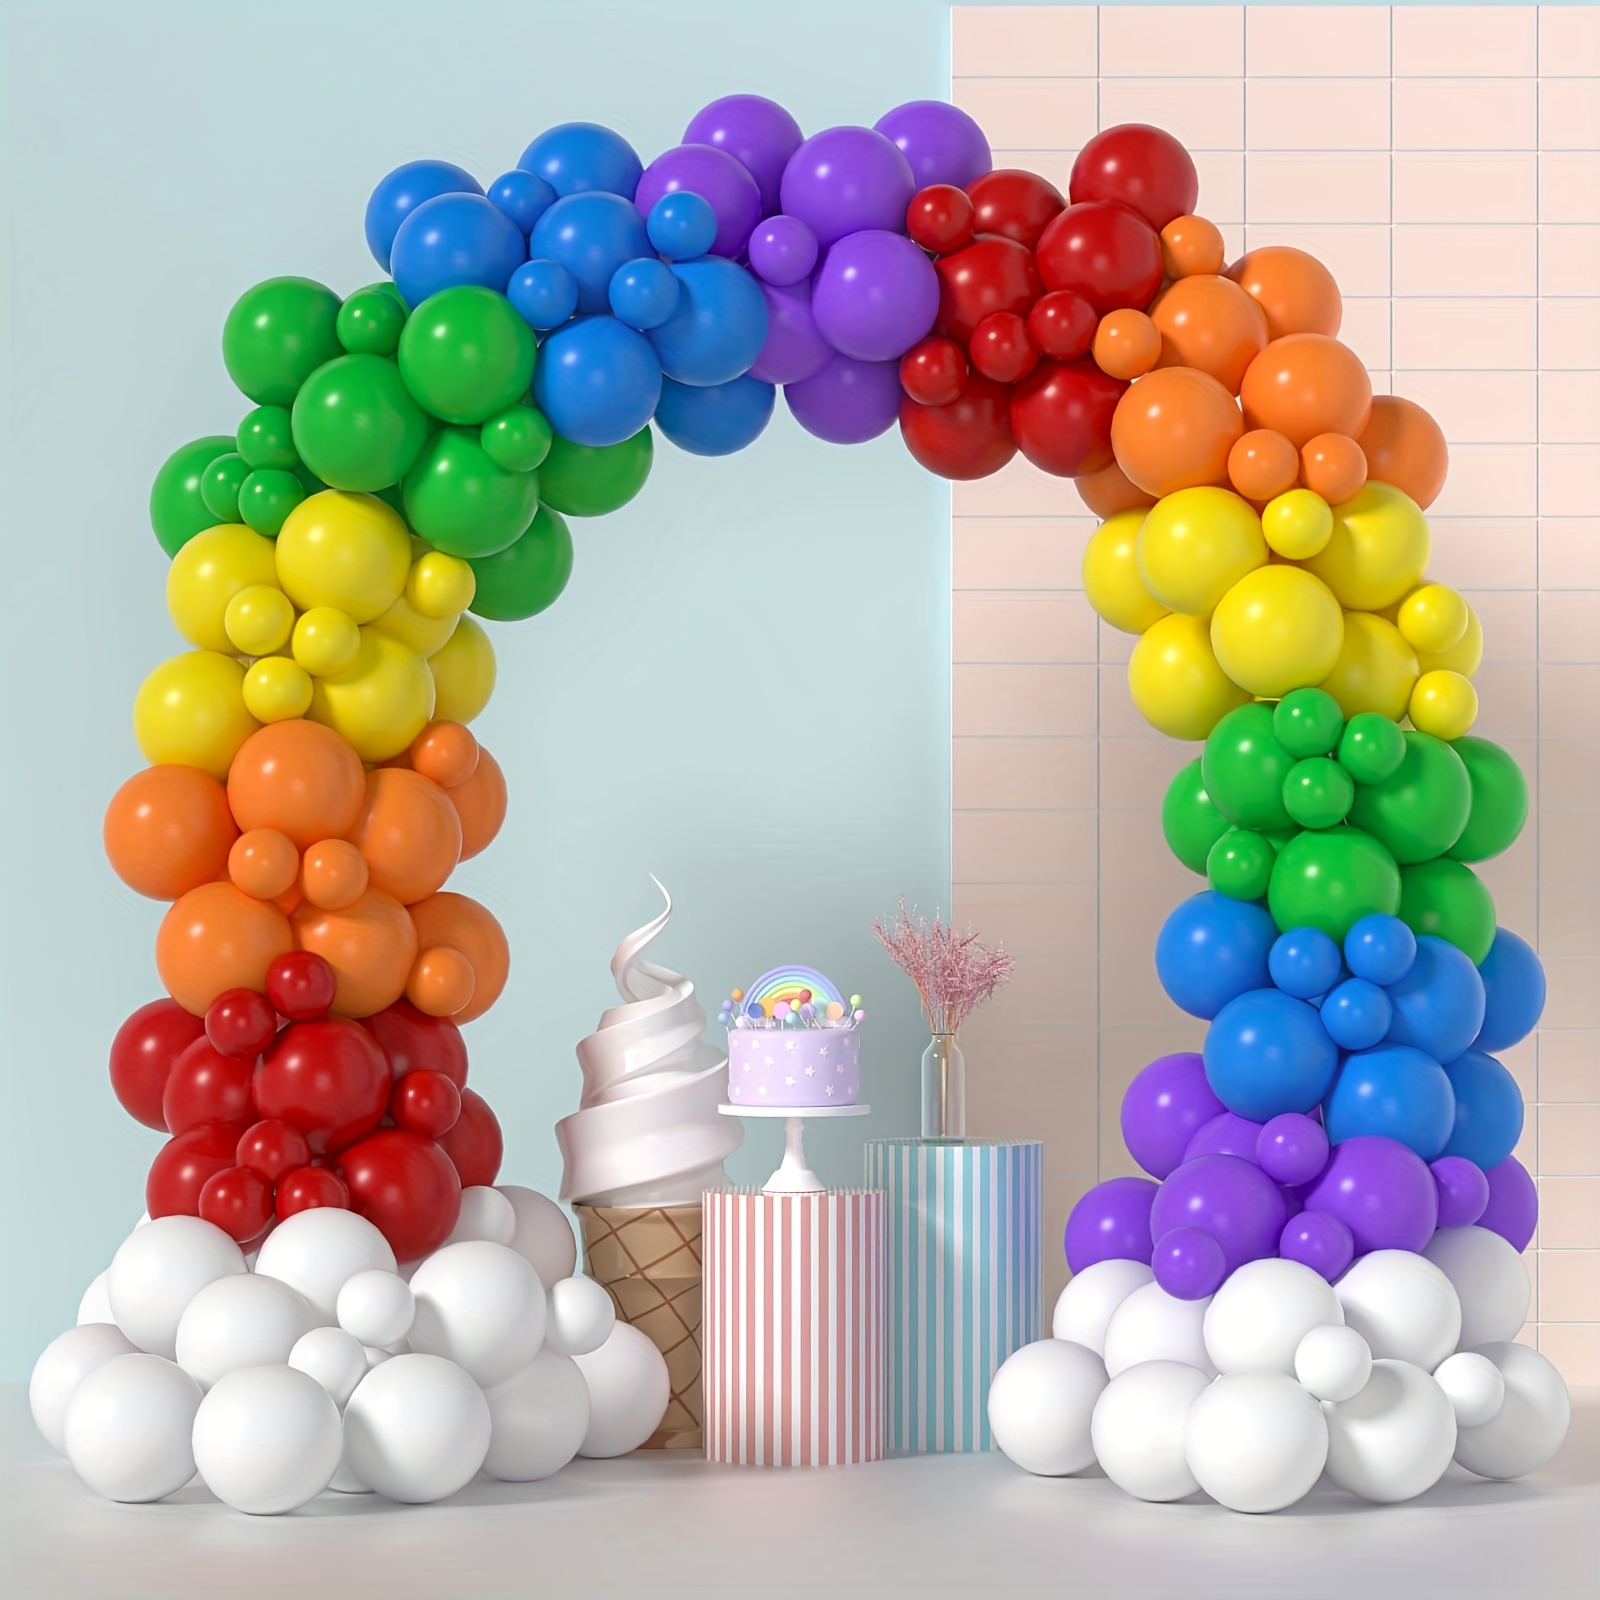 Reusble Pastel Rainbow Party Decorations for Birthday Parties